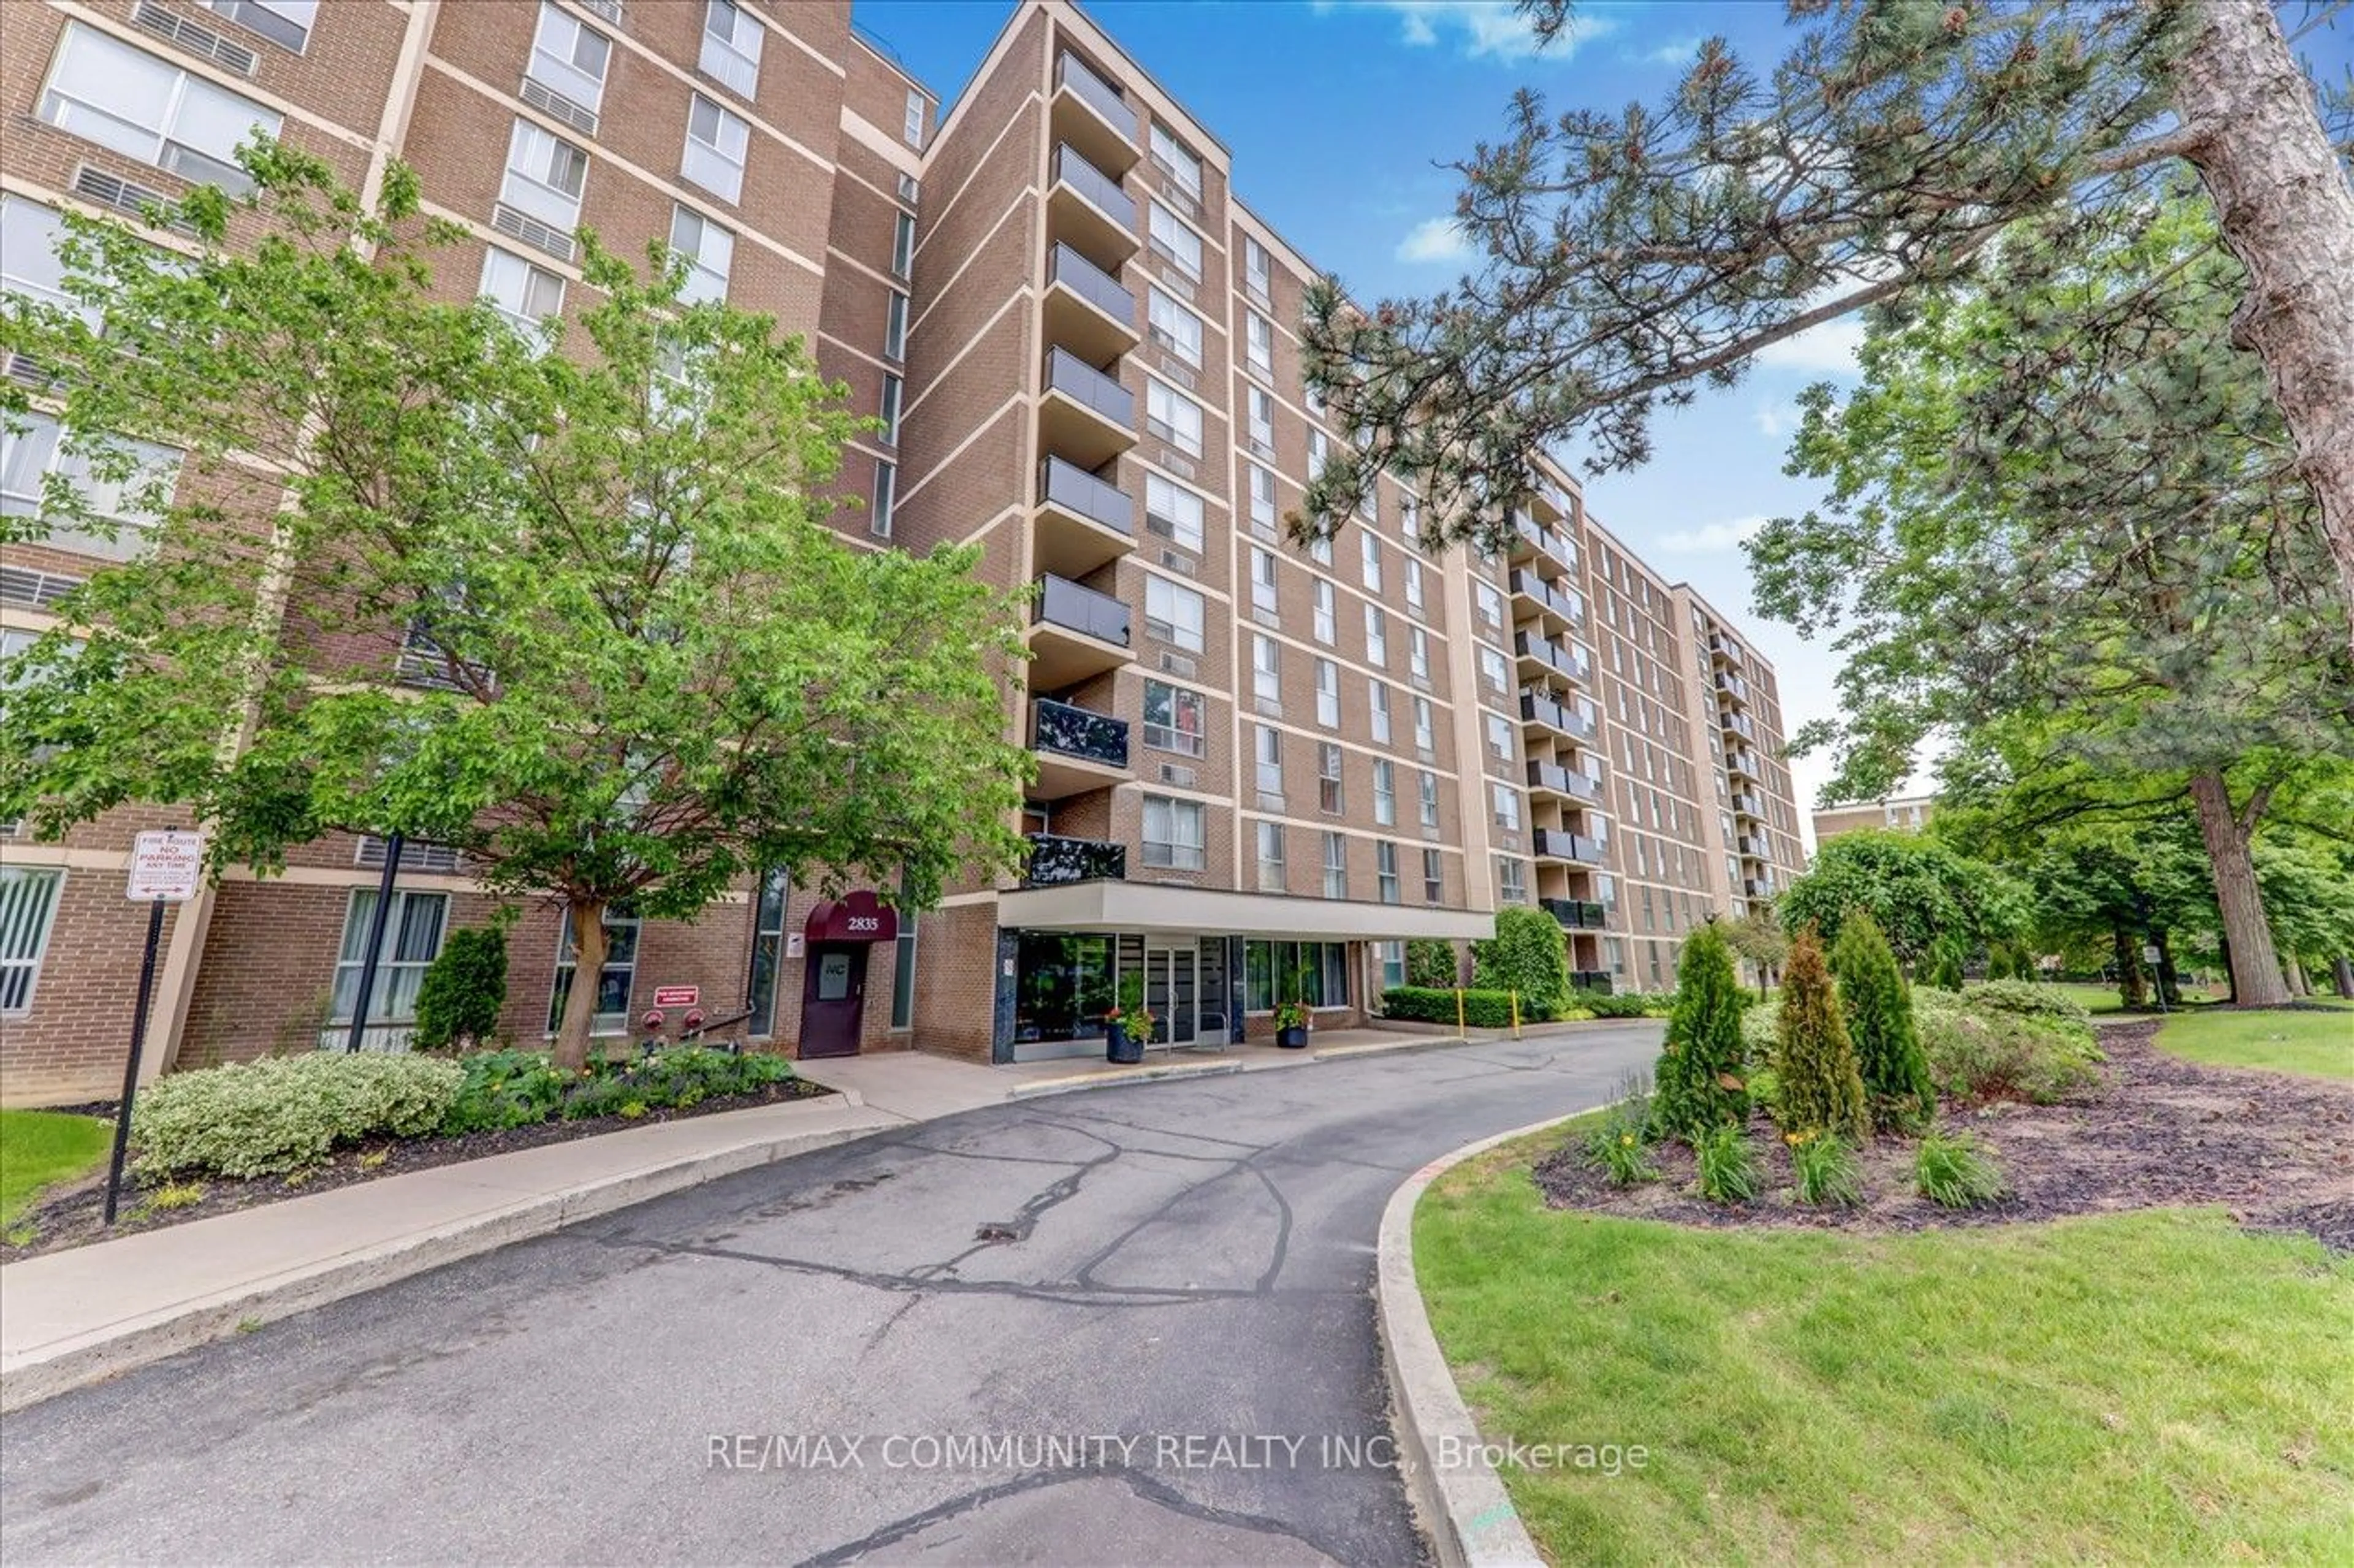 A pic from exterior of the house or condo for 2835 Islington Ave #503, Toronto Ontario M6L 2K2